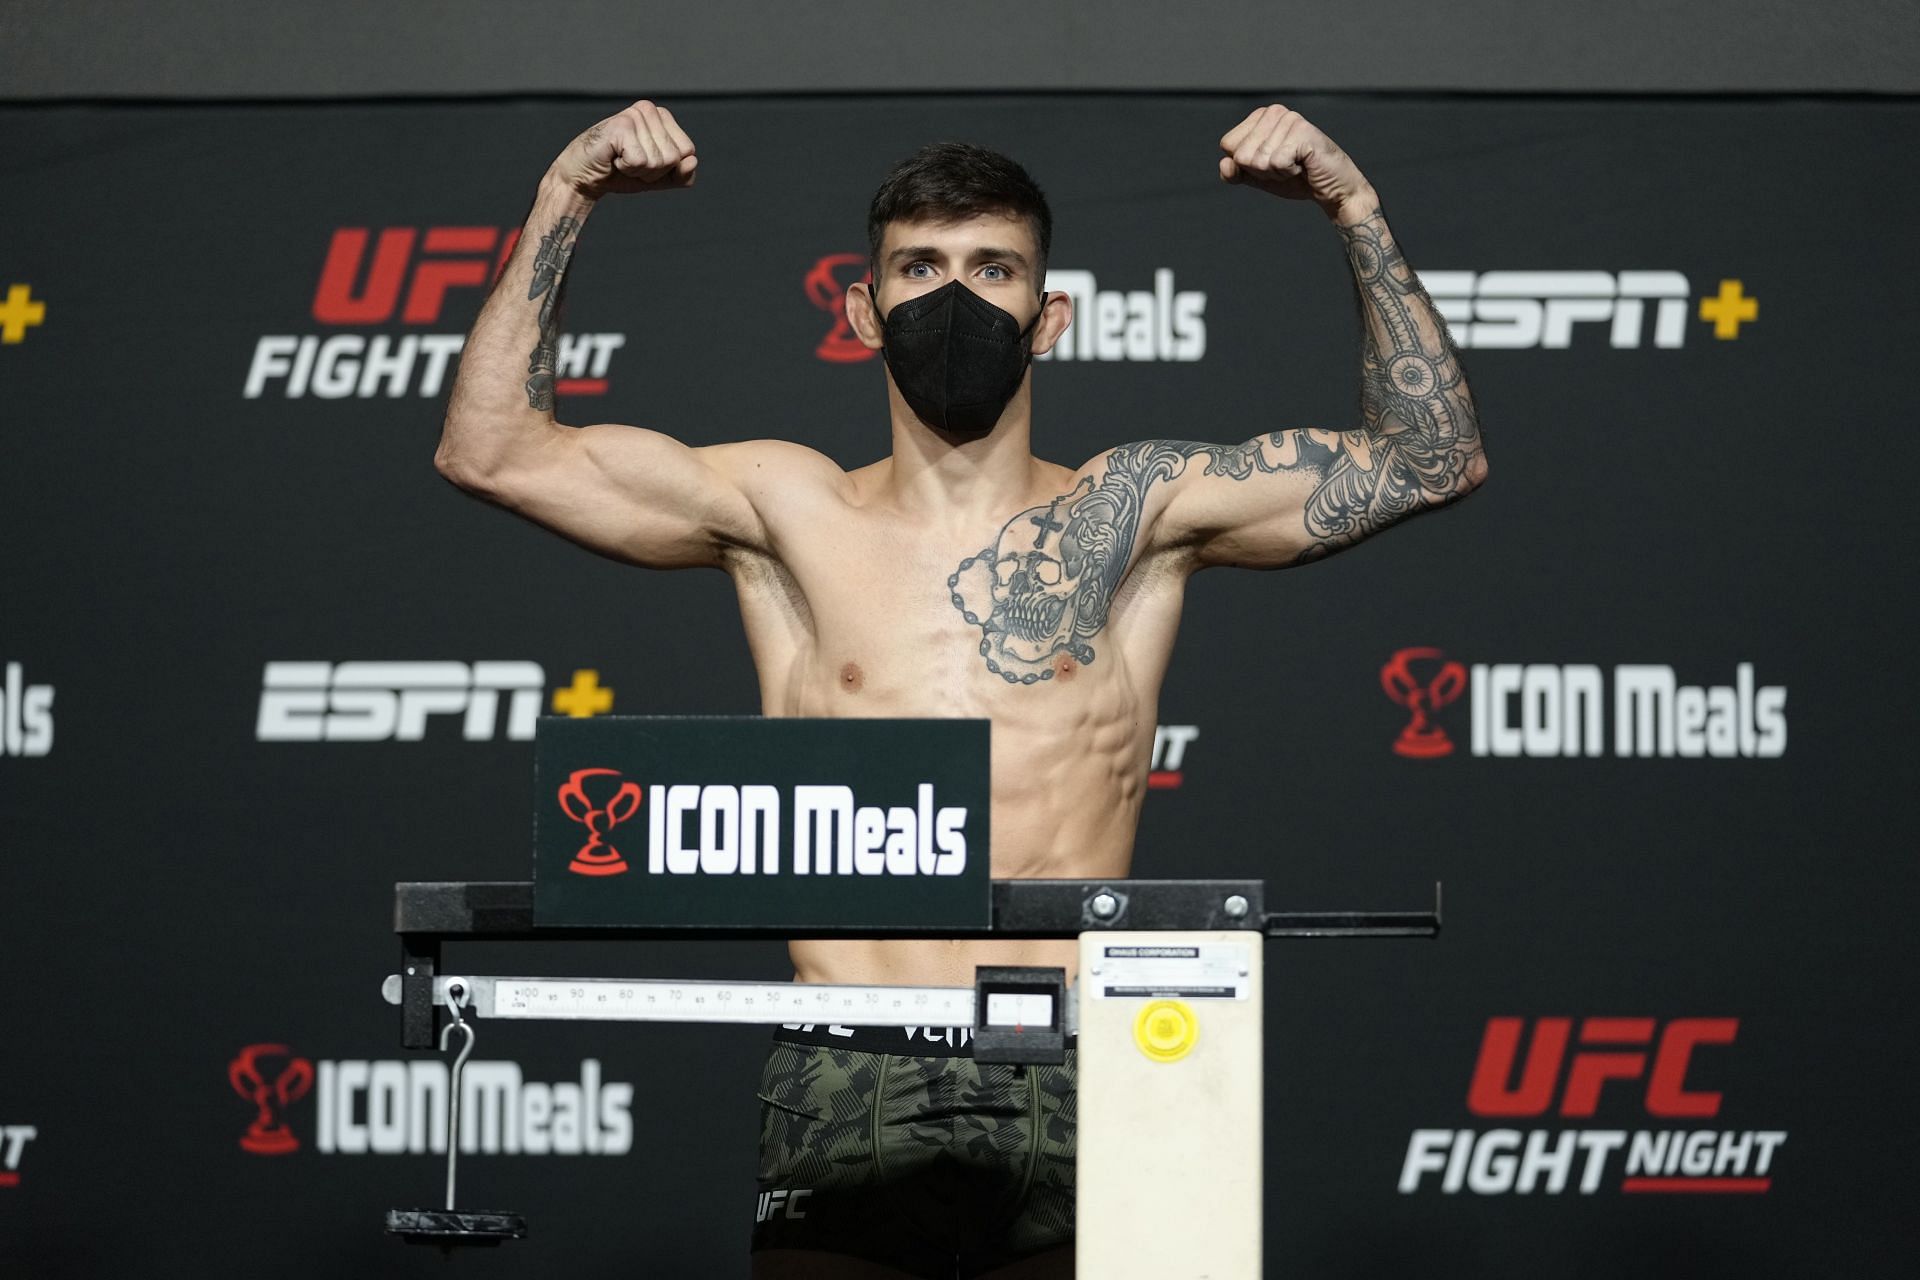 Matheus Nicolau could enter title contention after his win last night